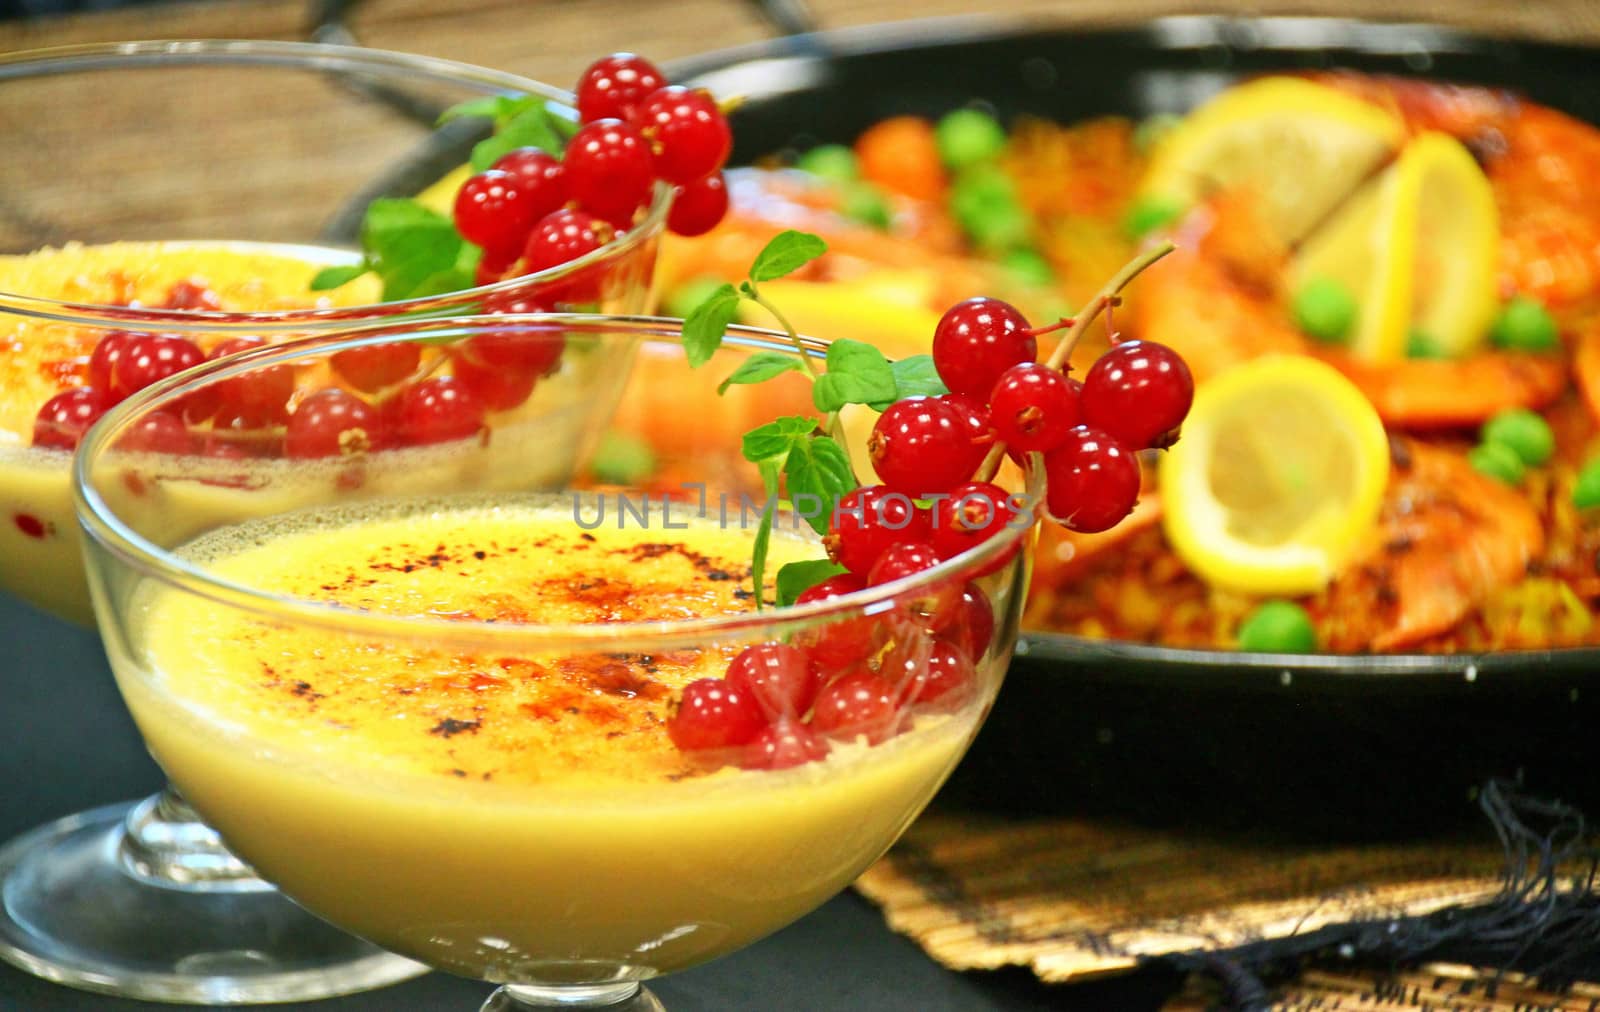 Crema catalana with red fruits and sea-food paella lunch on a menu presentation. Both are very popular dishes in the Spanish cuisine.